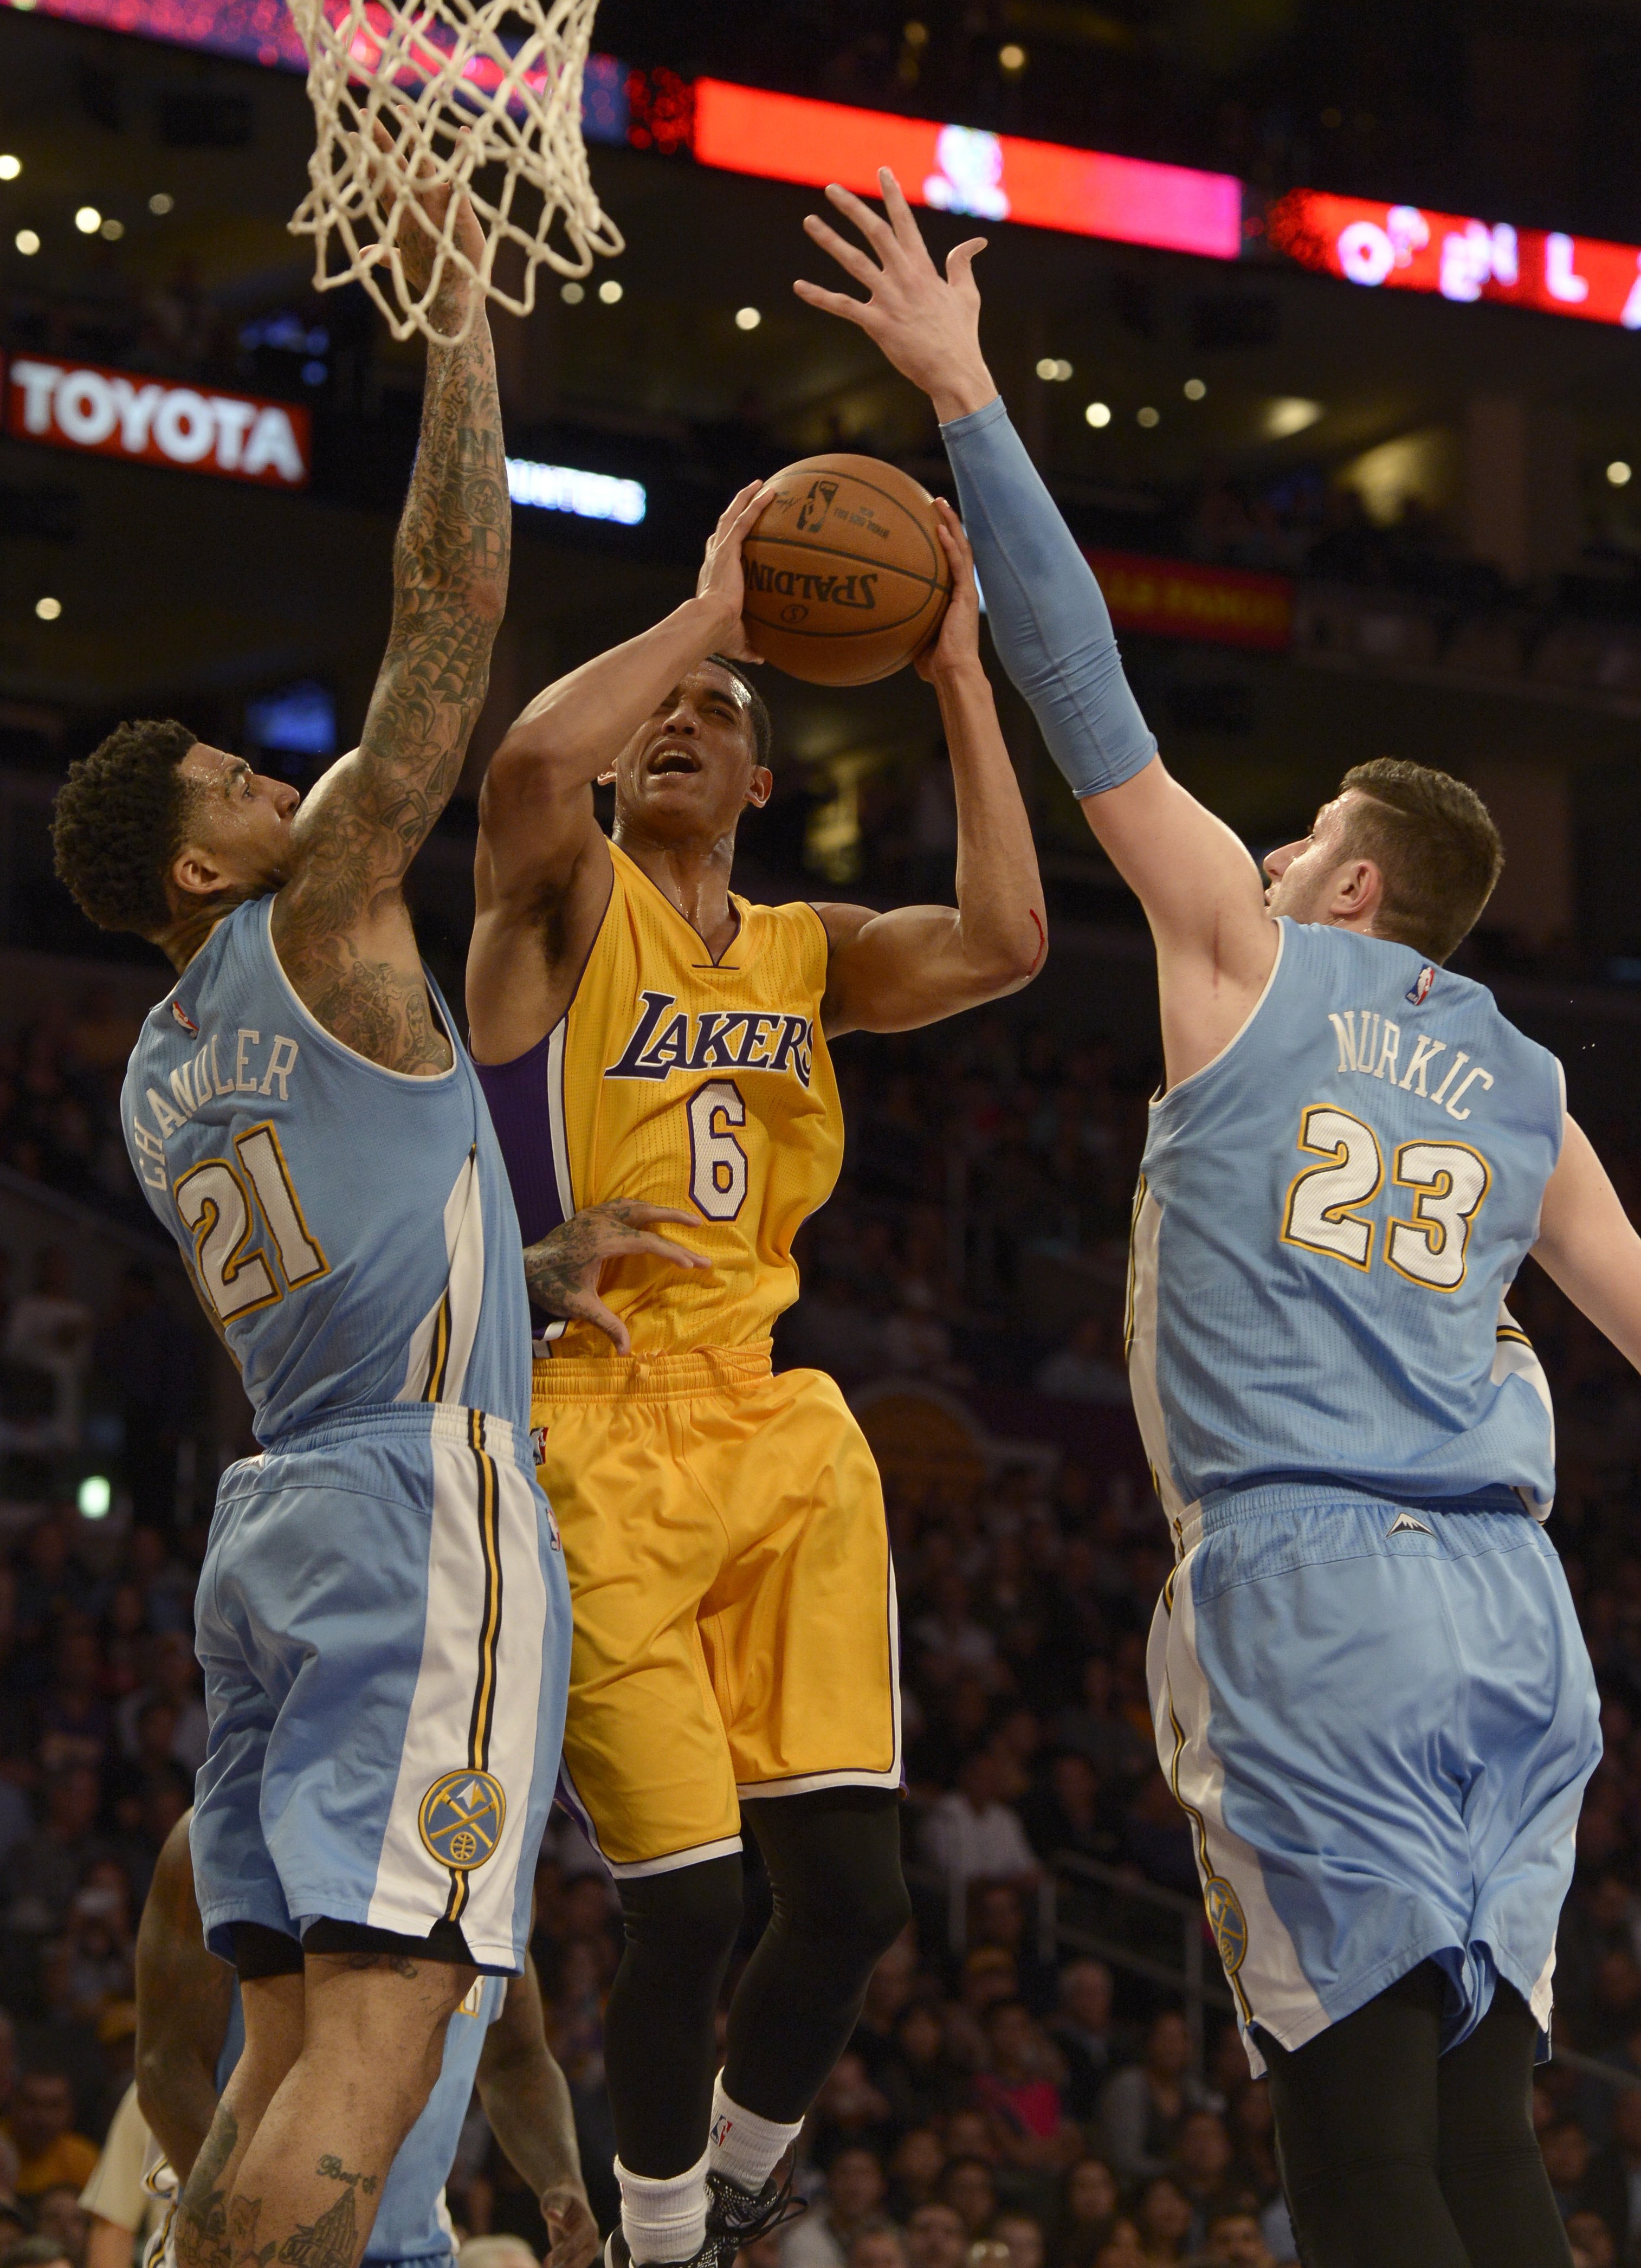 Lakers#6 Jordan Clarkson is contested by "n21" and Nuggets#23 Jusuf Nurkic in the first half. The Los Angeles Lakers hosted the Denver Nuggets at Staples Center in Los Angeles, CA February 10, 2015.  (Photos by John McCoy / Los Angeles Daily News)